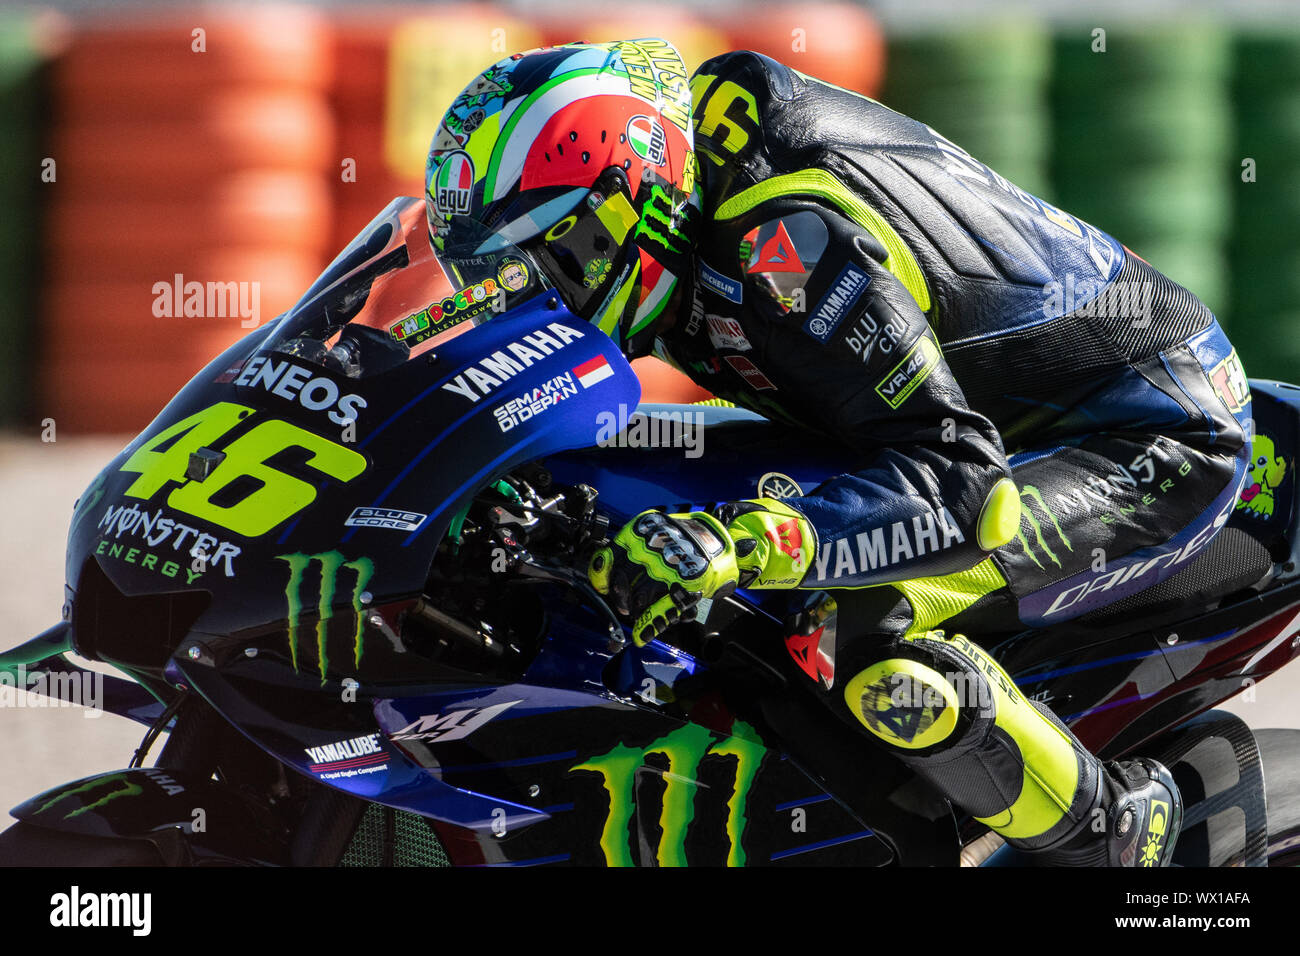 VALENTINO ROSSI, ITALIAN MOTOGP RIDER NUMBER 46 (WITH SPECIAL CELEBRATIVE HELMET FOR MISANO) FOR YAMAHA MONSTER TEAM  during Saturday Free Practice & Stock Photo